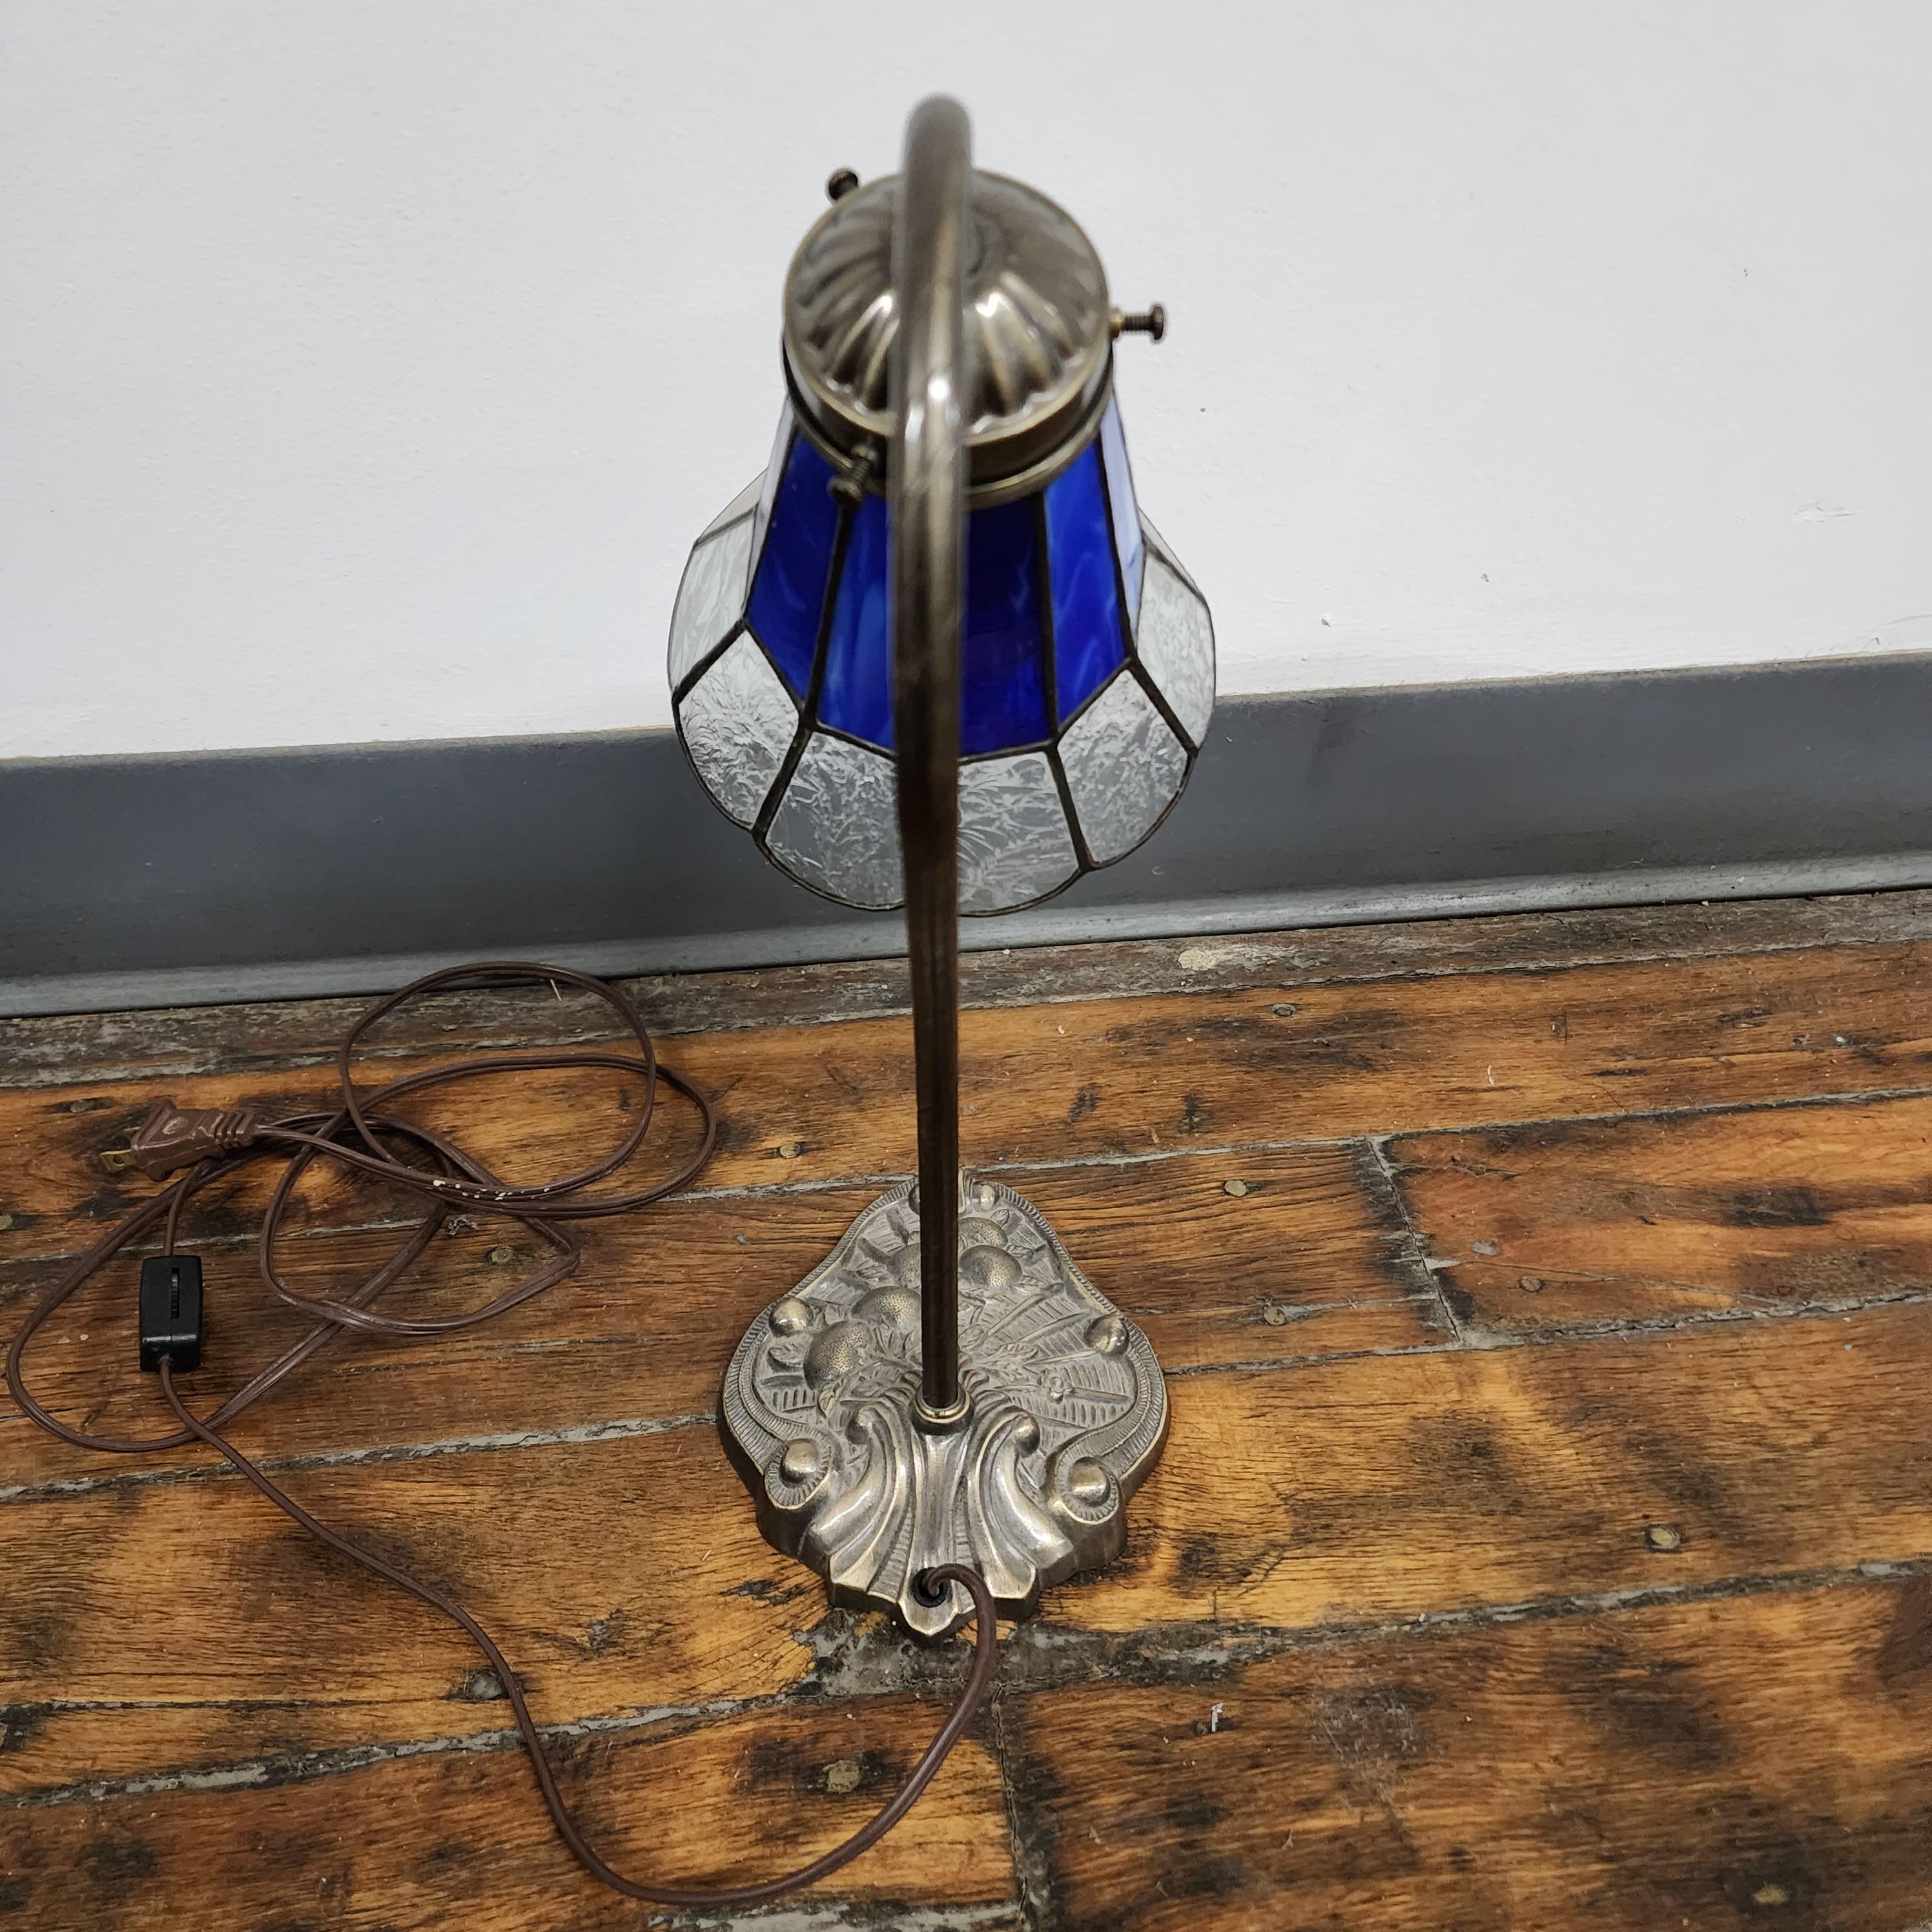 Vintage Tiffany style stained glass lily pad table lamp. Cast Lily pad decorative base with curved metal stem. Has beautiful blue and clear stained glass shade. Great shape, works perfectly.